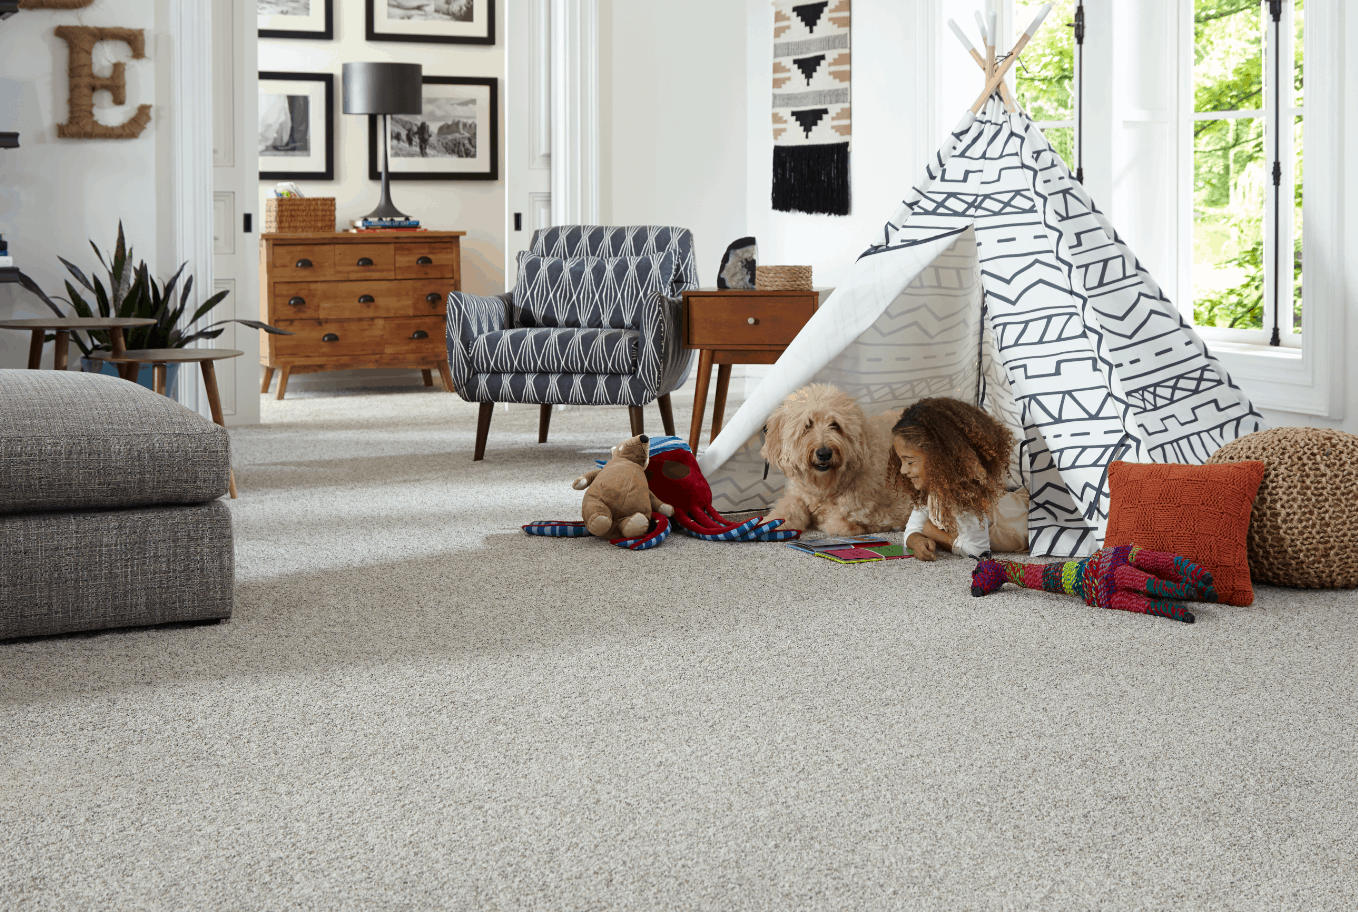 Child and dog in tent playing on carpeted floor